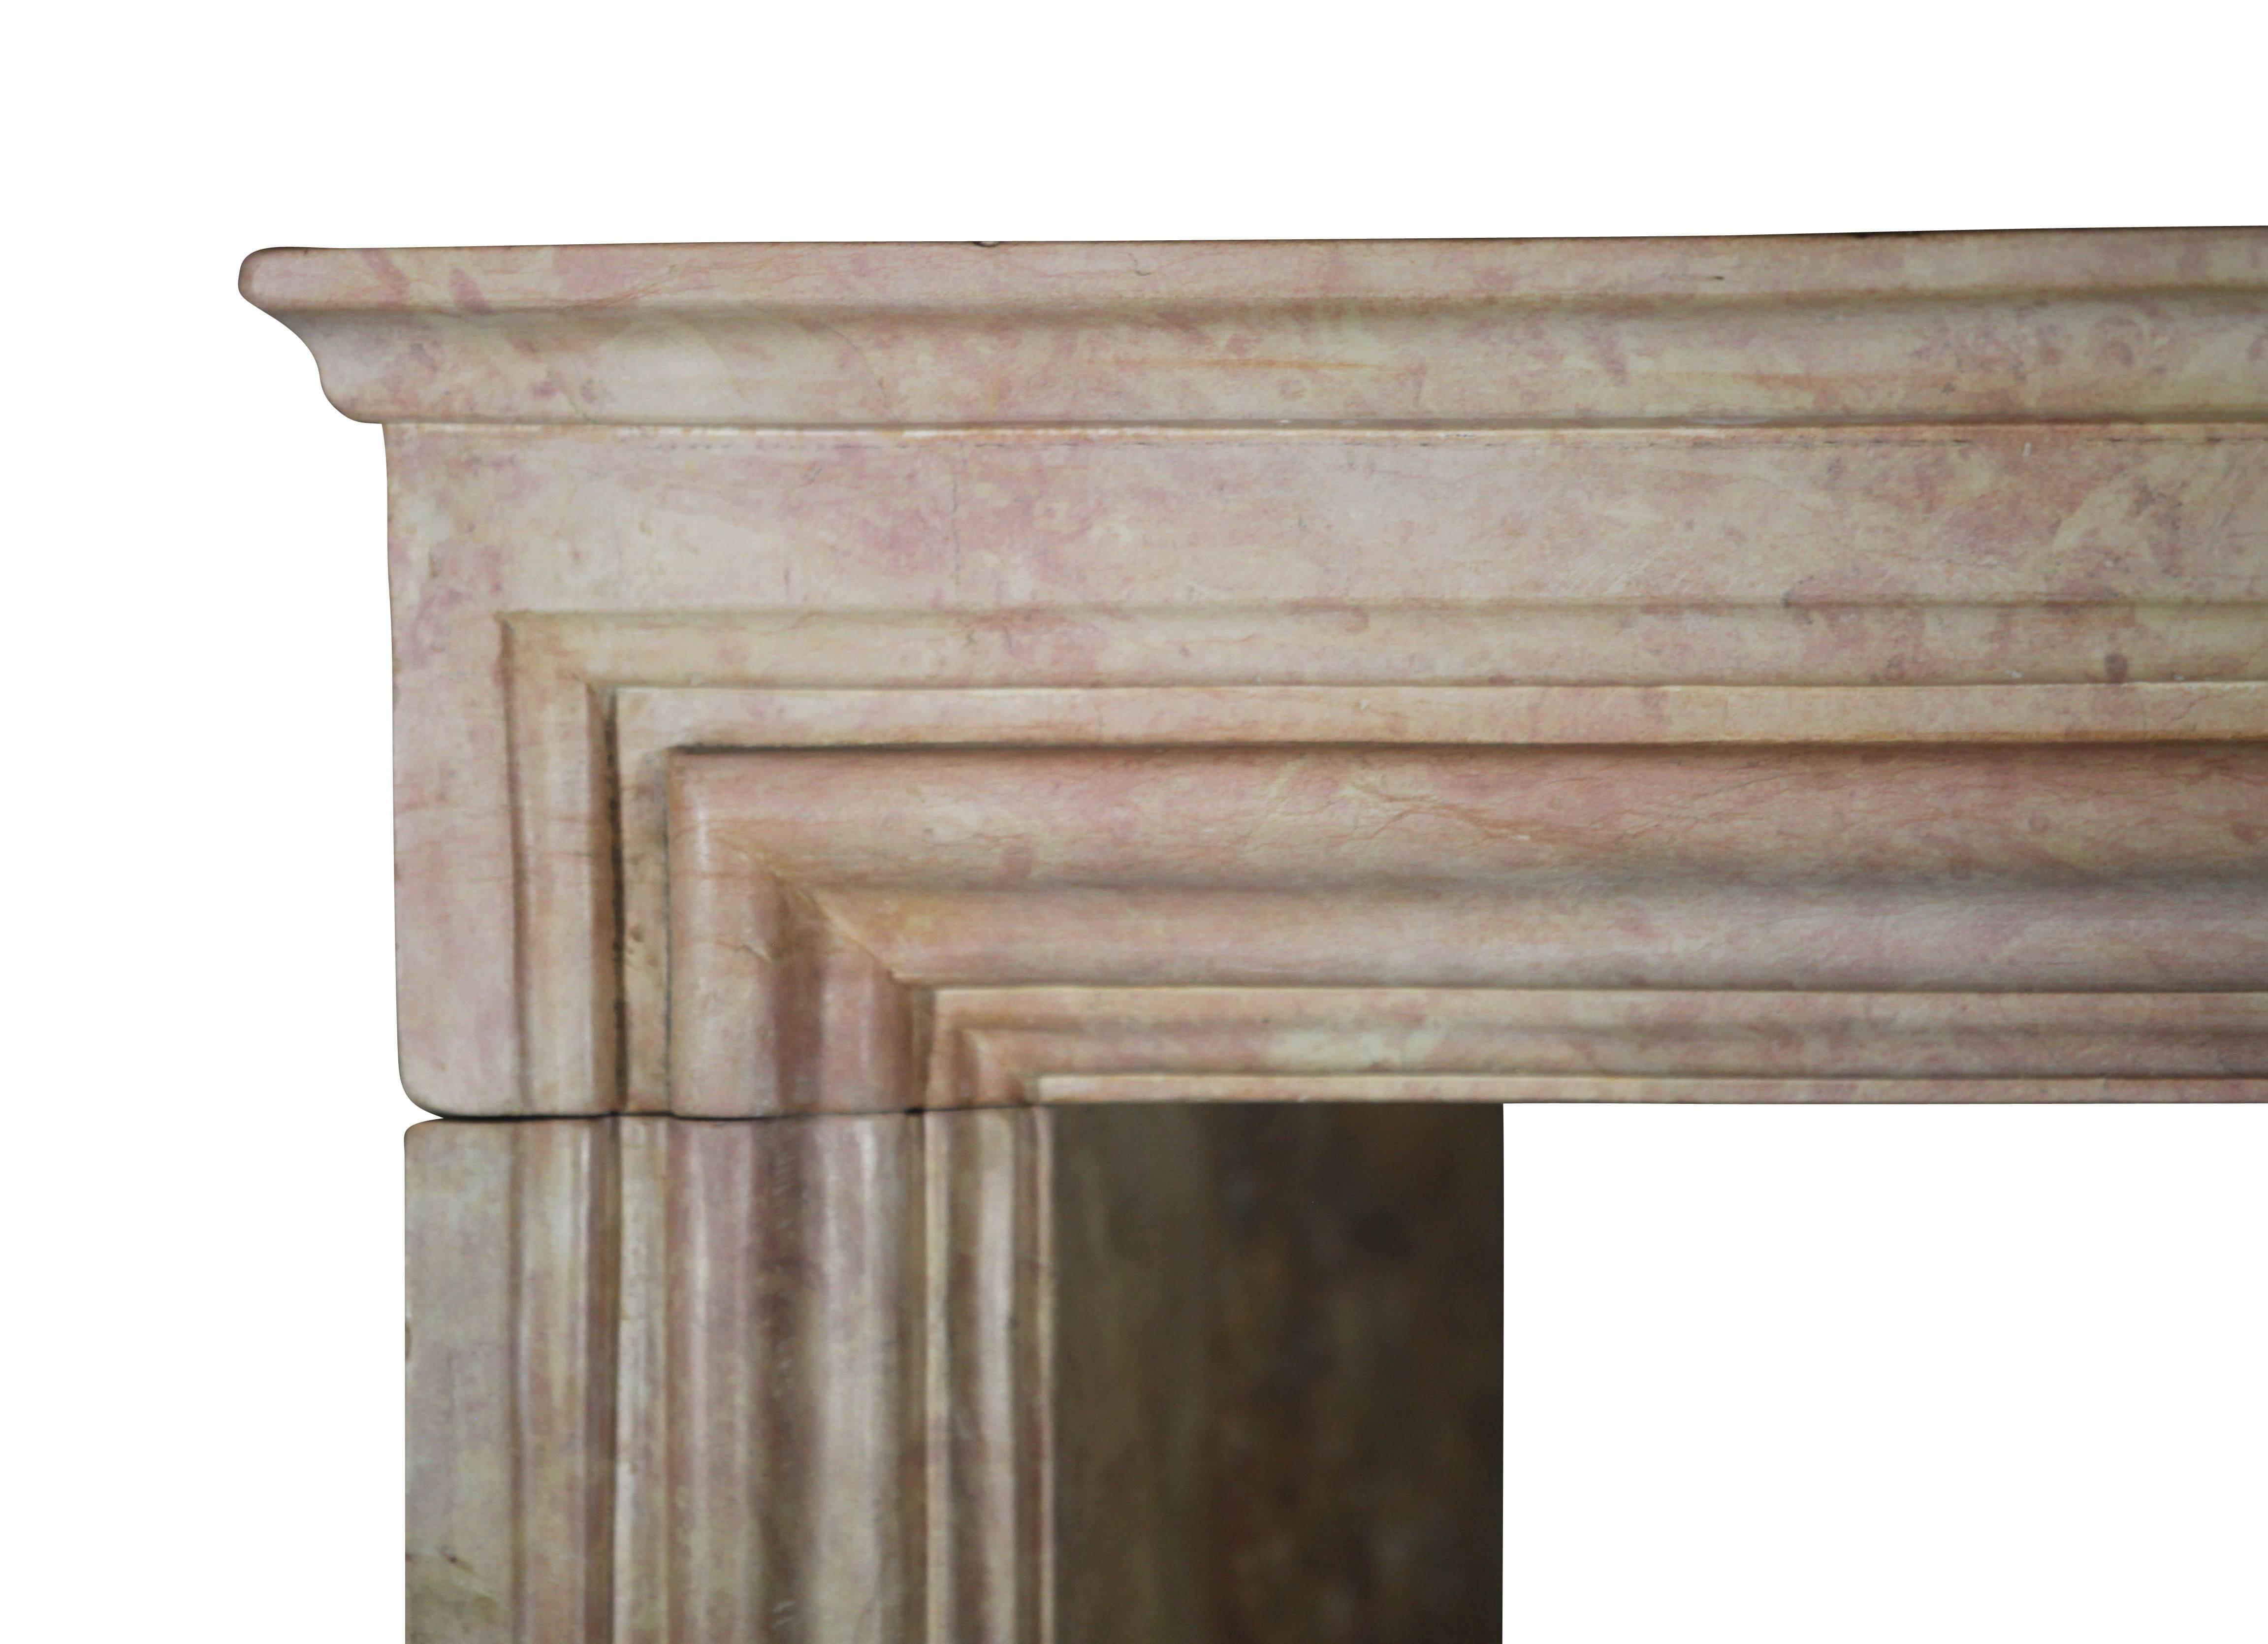 Louis XIV Antique French Fireplace Surround in Rose Liseron Marble for Timely Interior